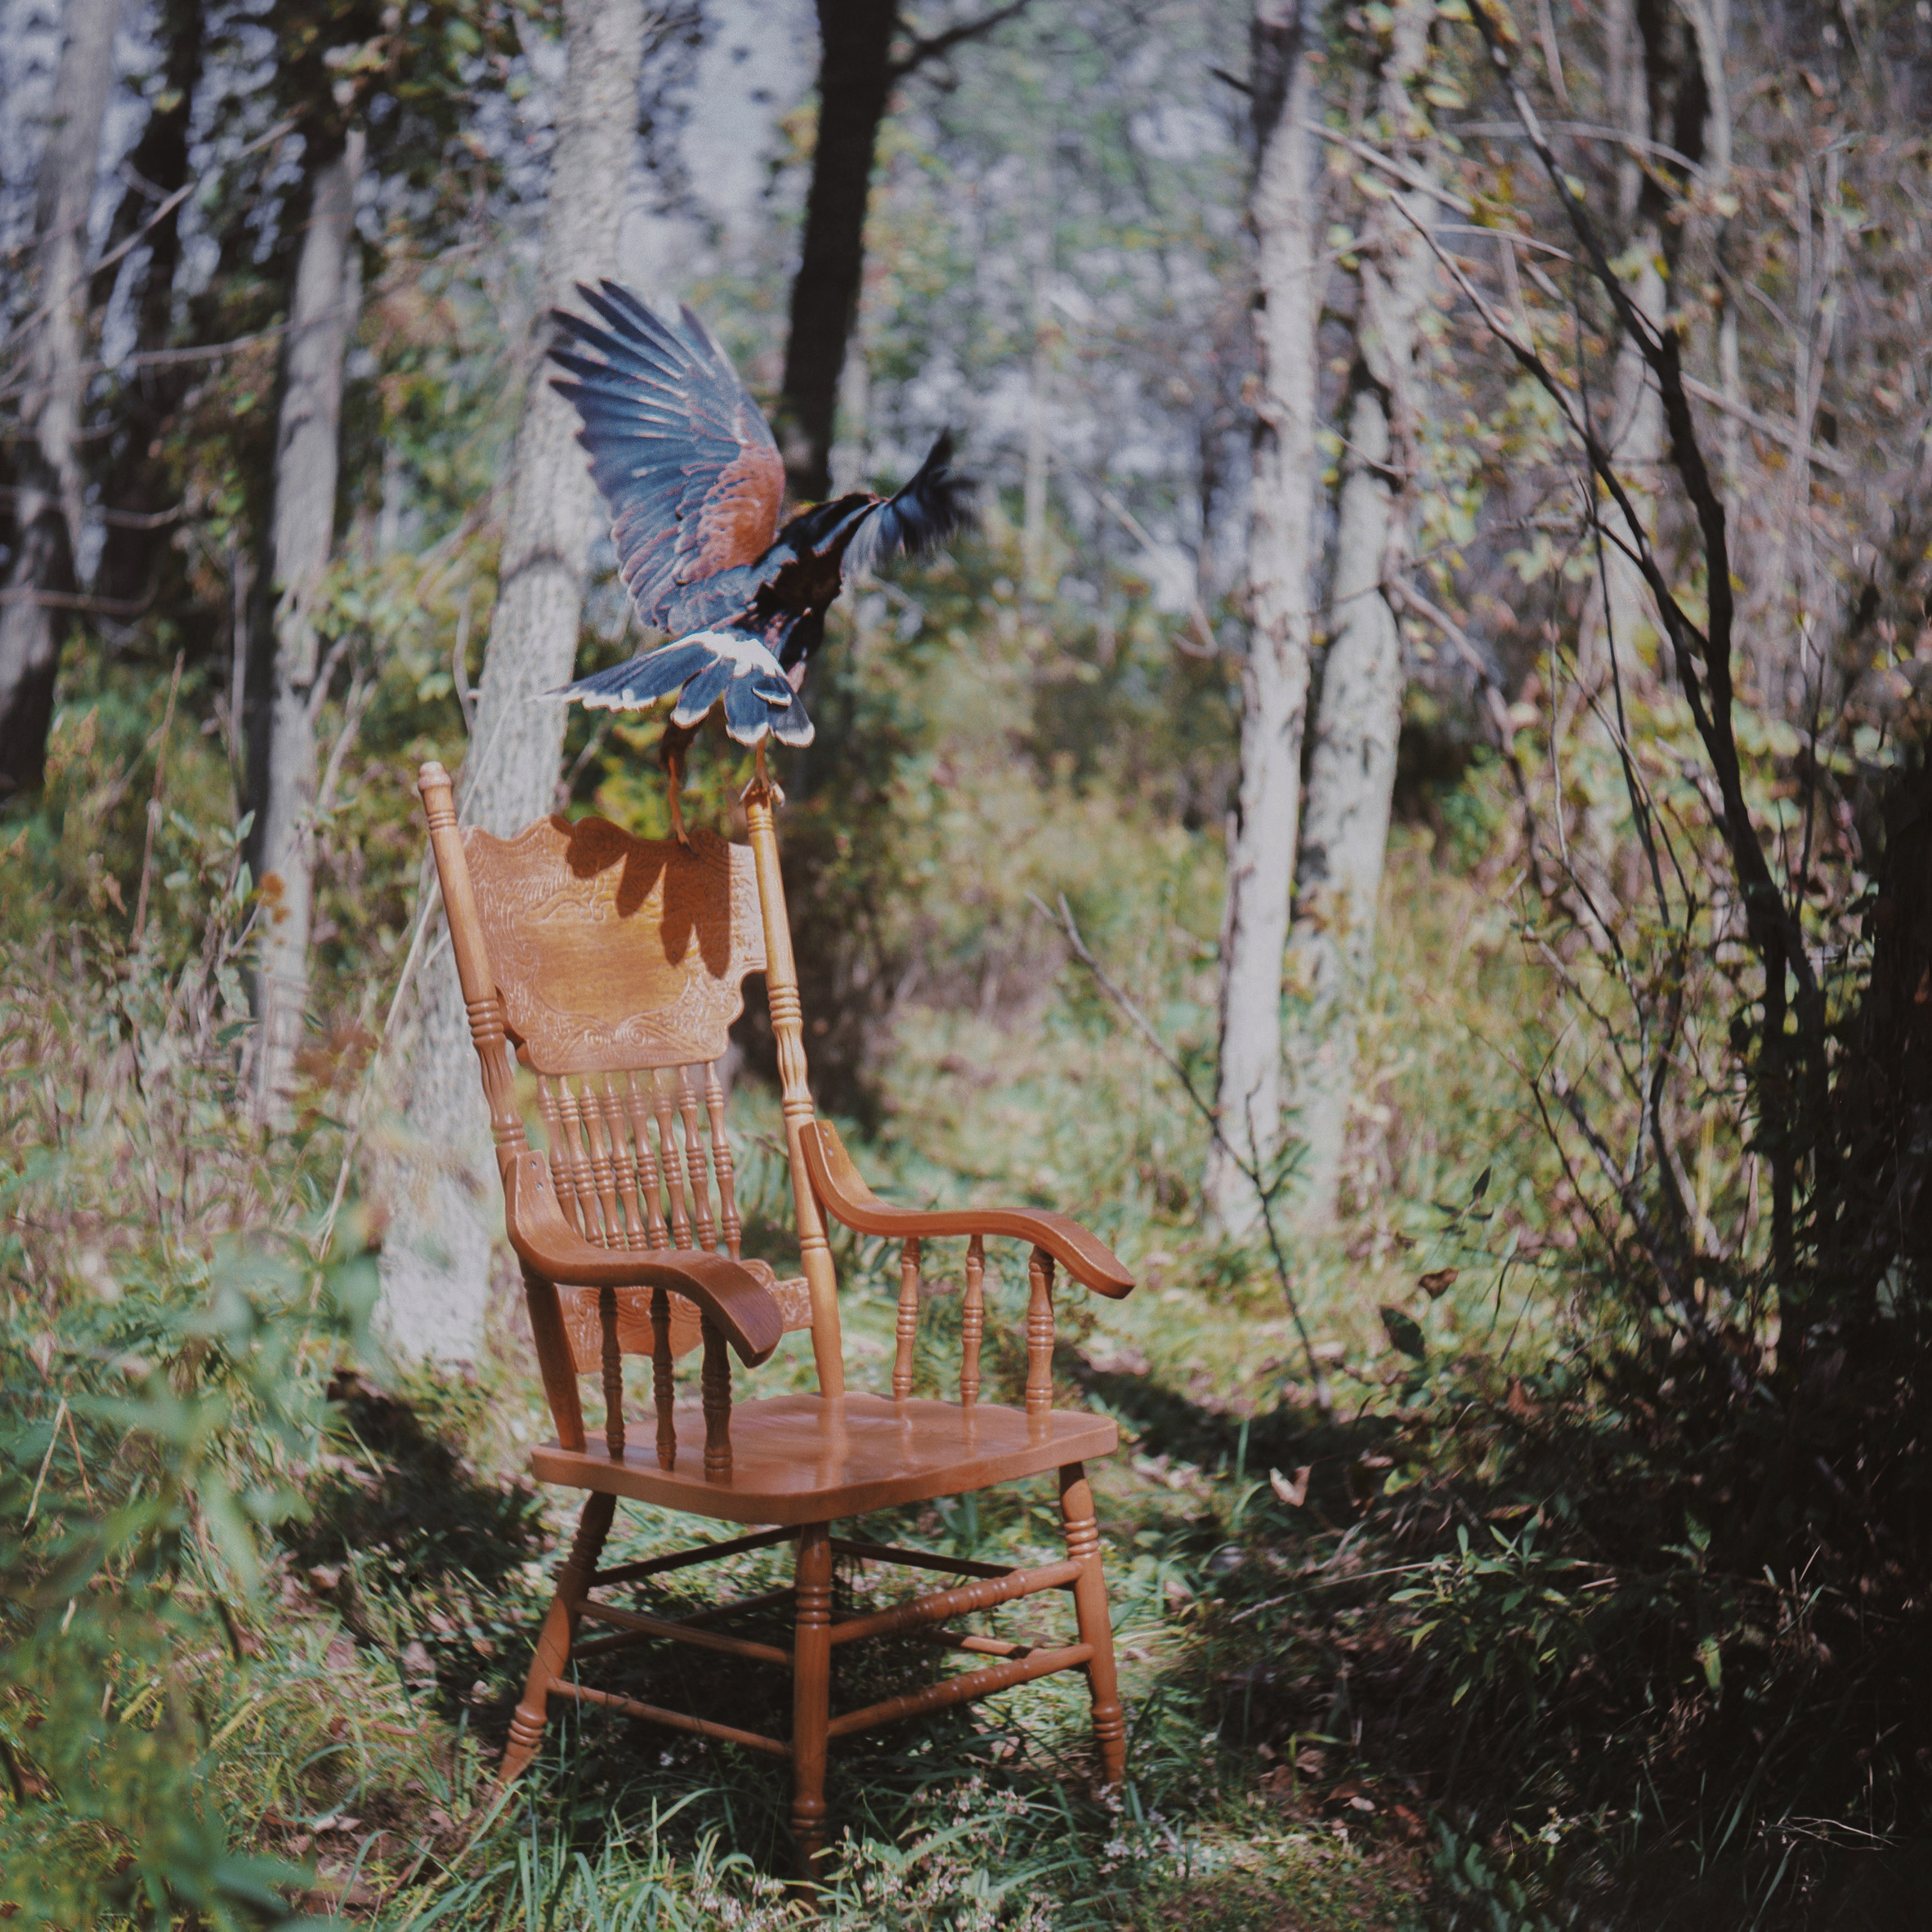 A photograph of a hawk sitting on a wooden chair